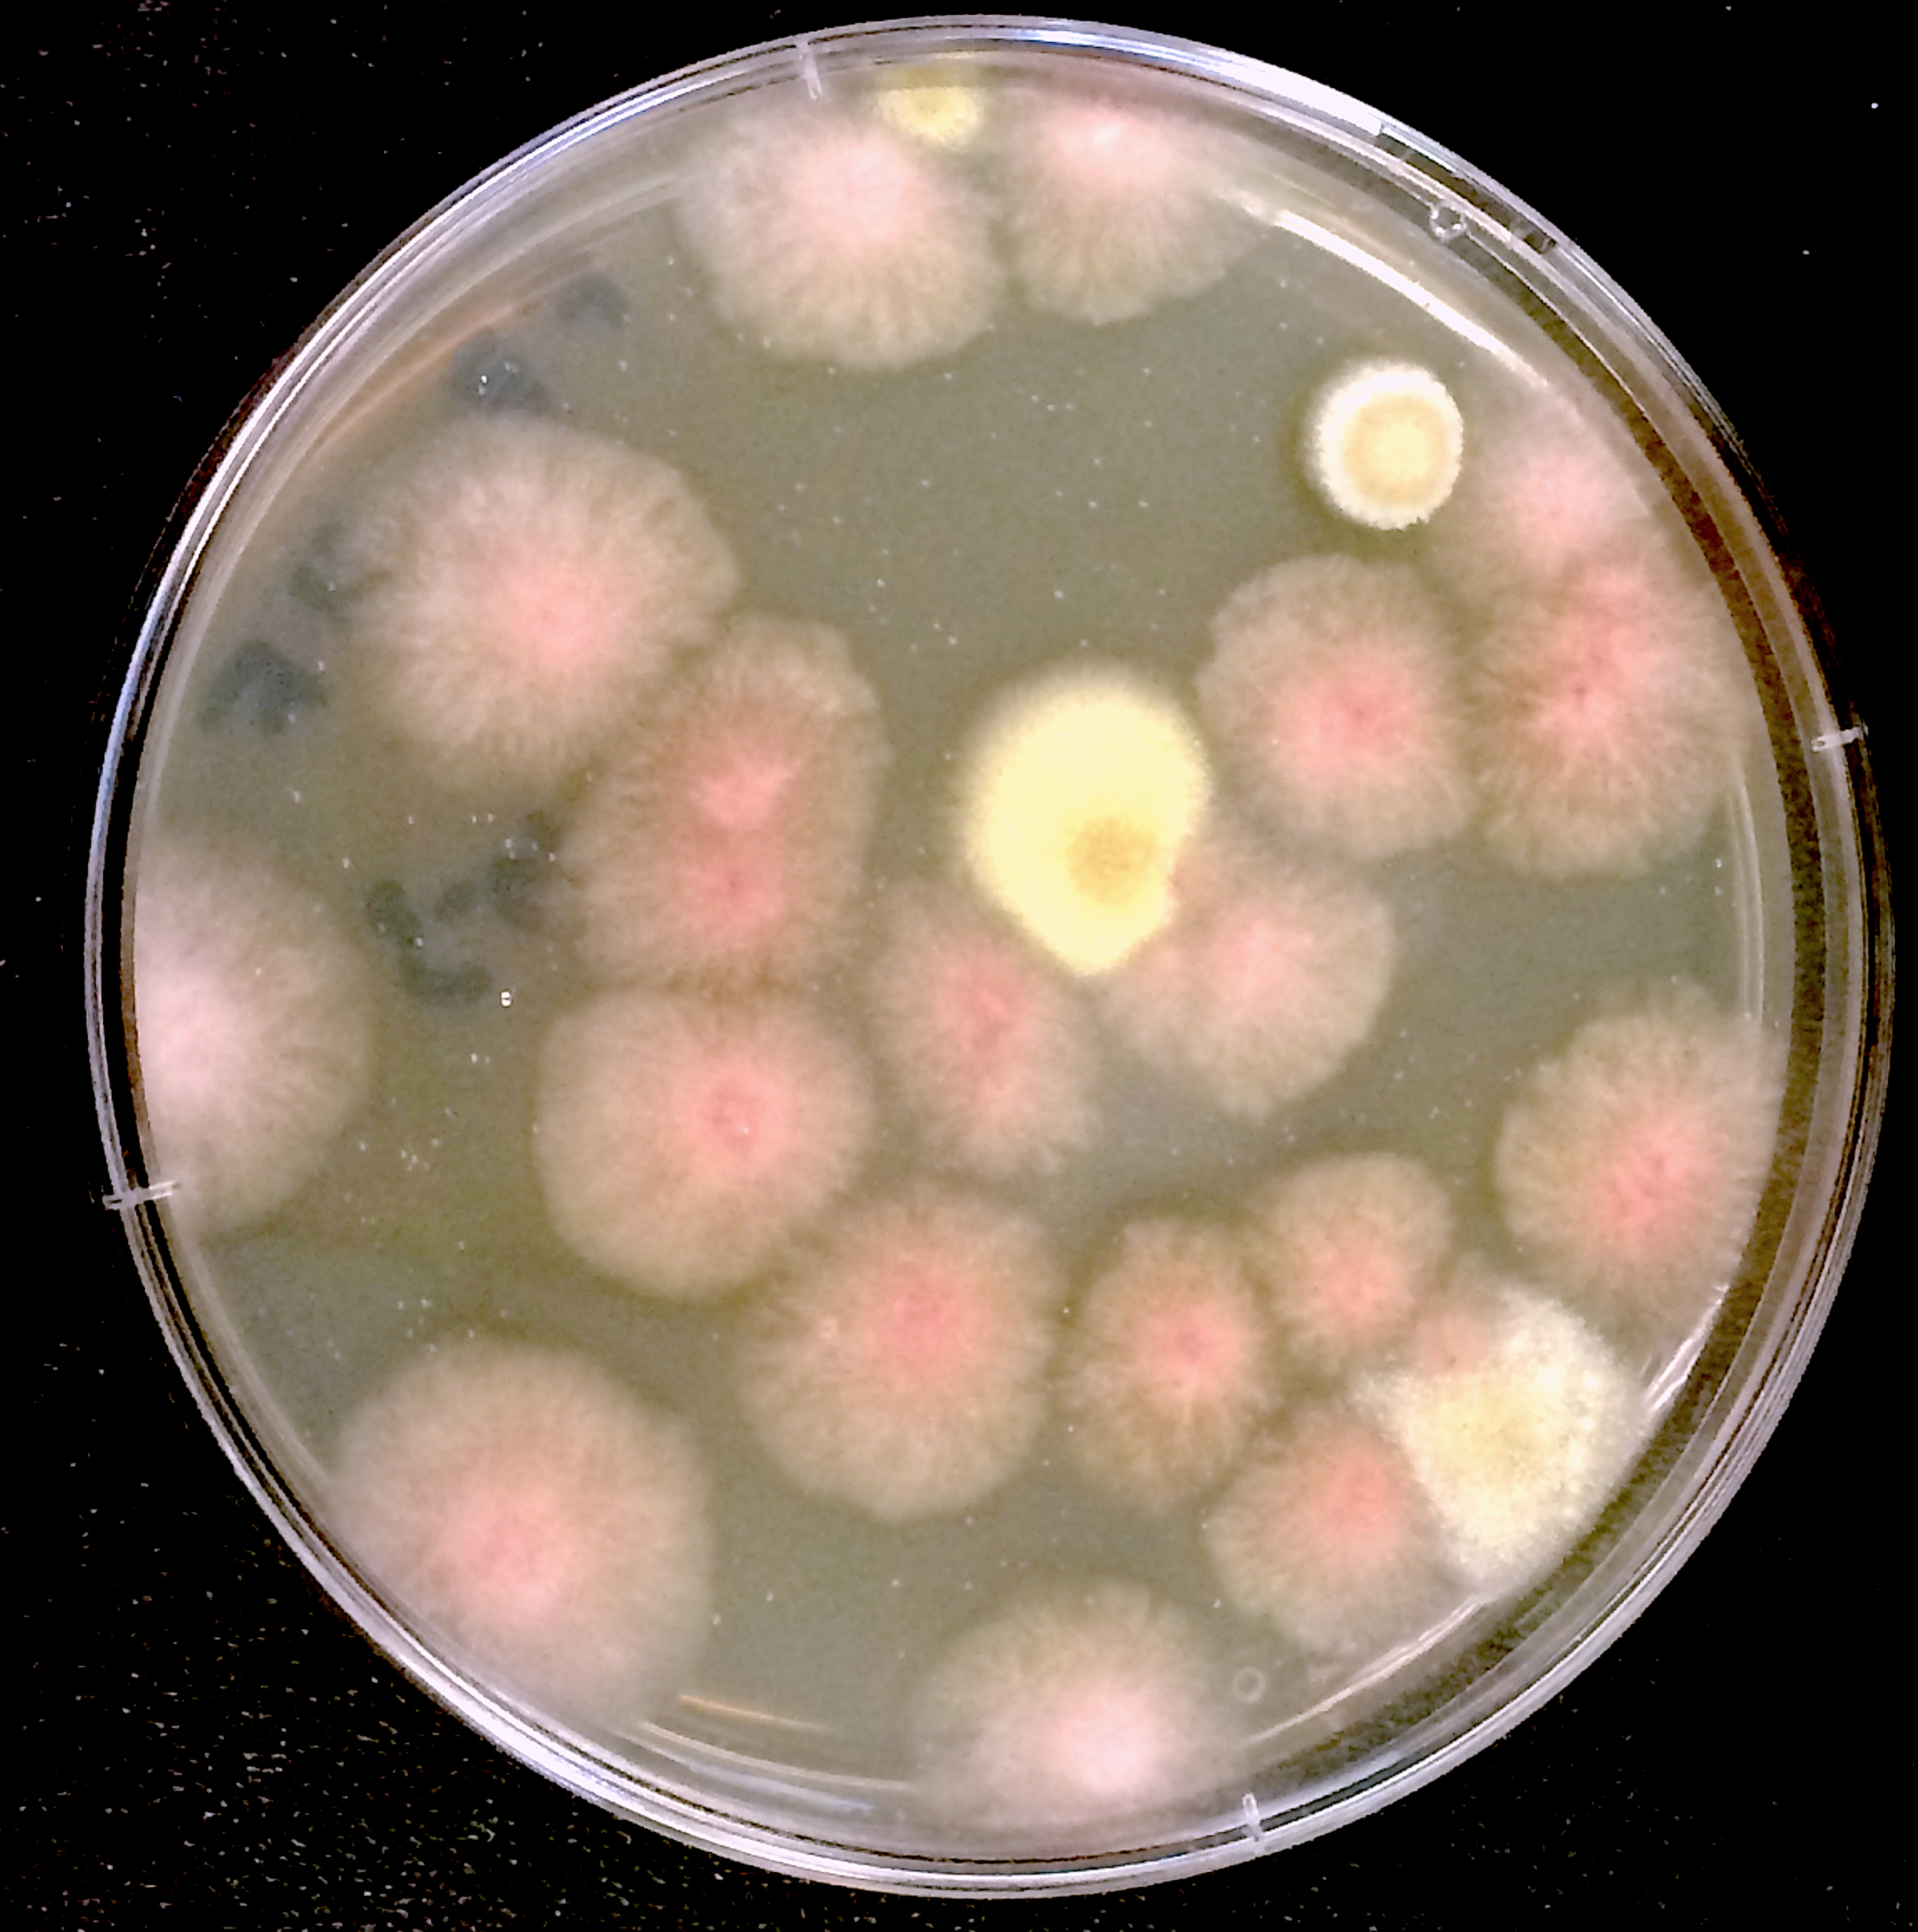 Colonies of fungi grown on the International Space Station, one of many extreme environments researchers are studying to see how microbes behave. Image credit: NASA/JPL-Caltech